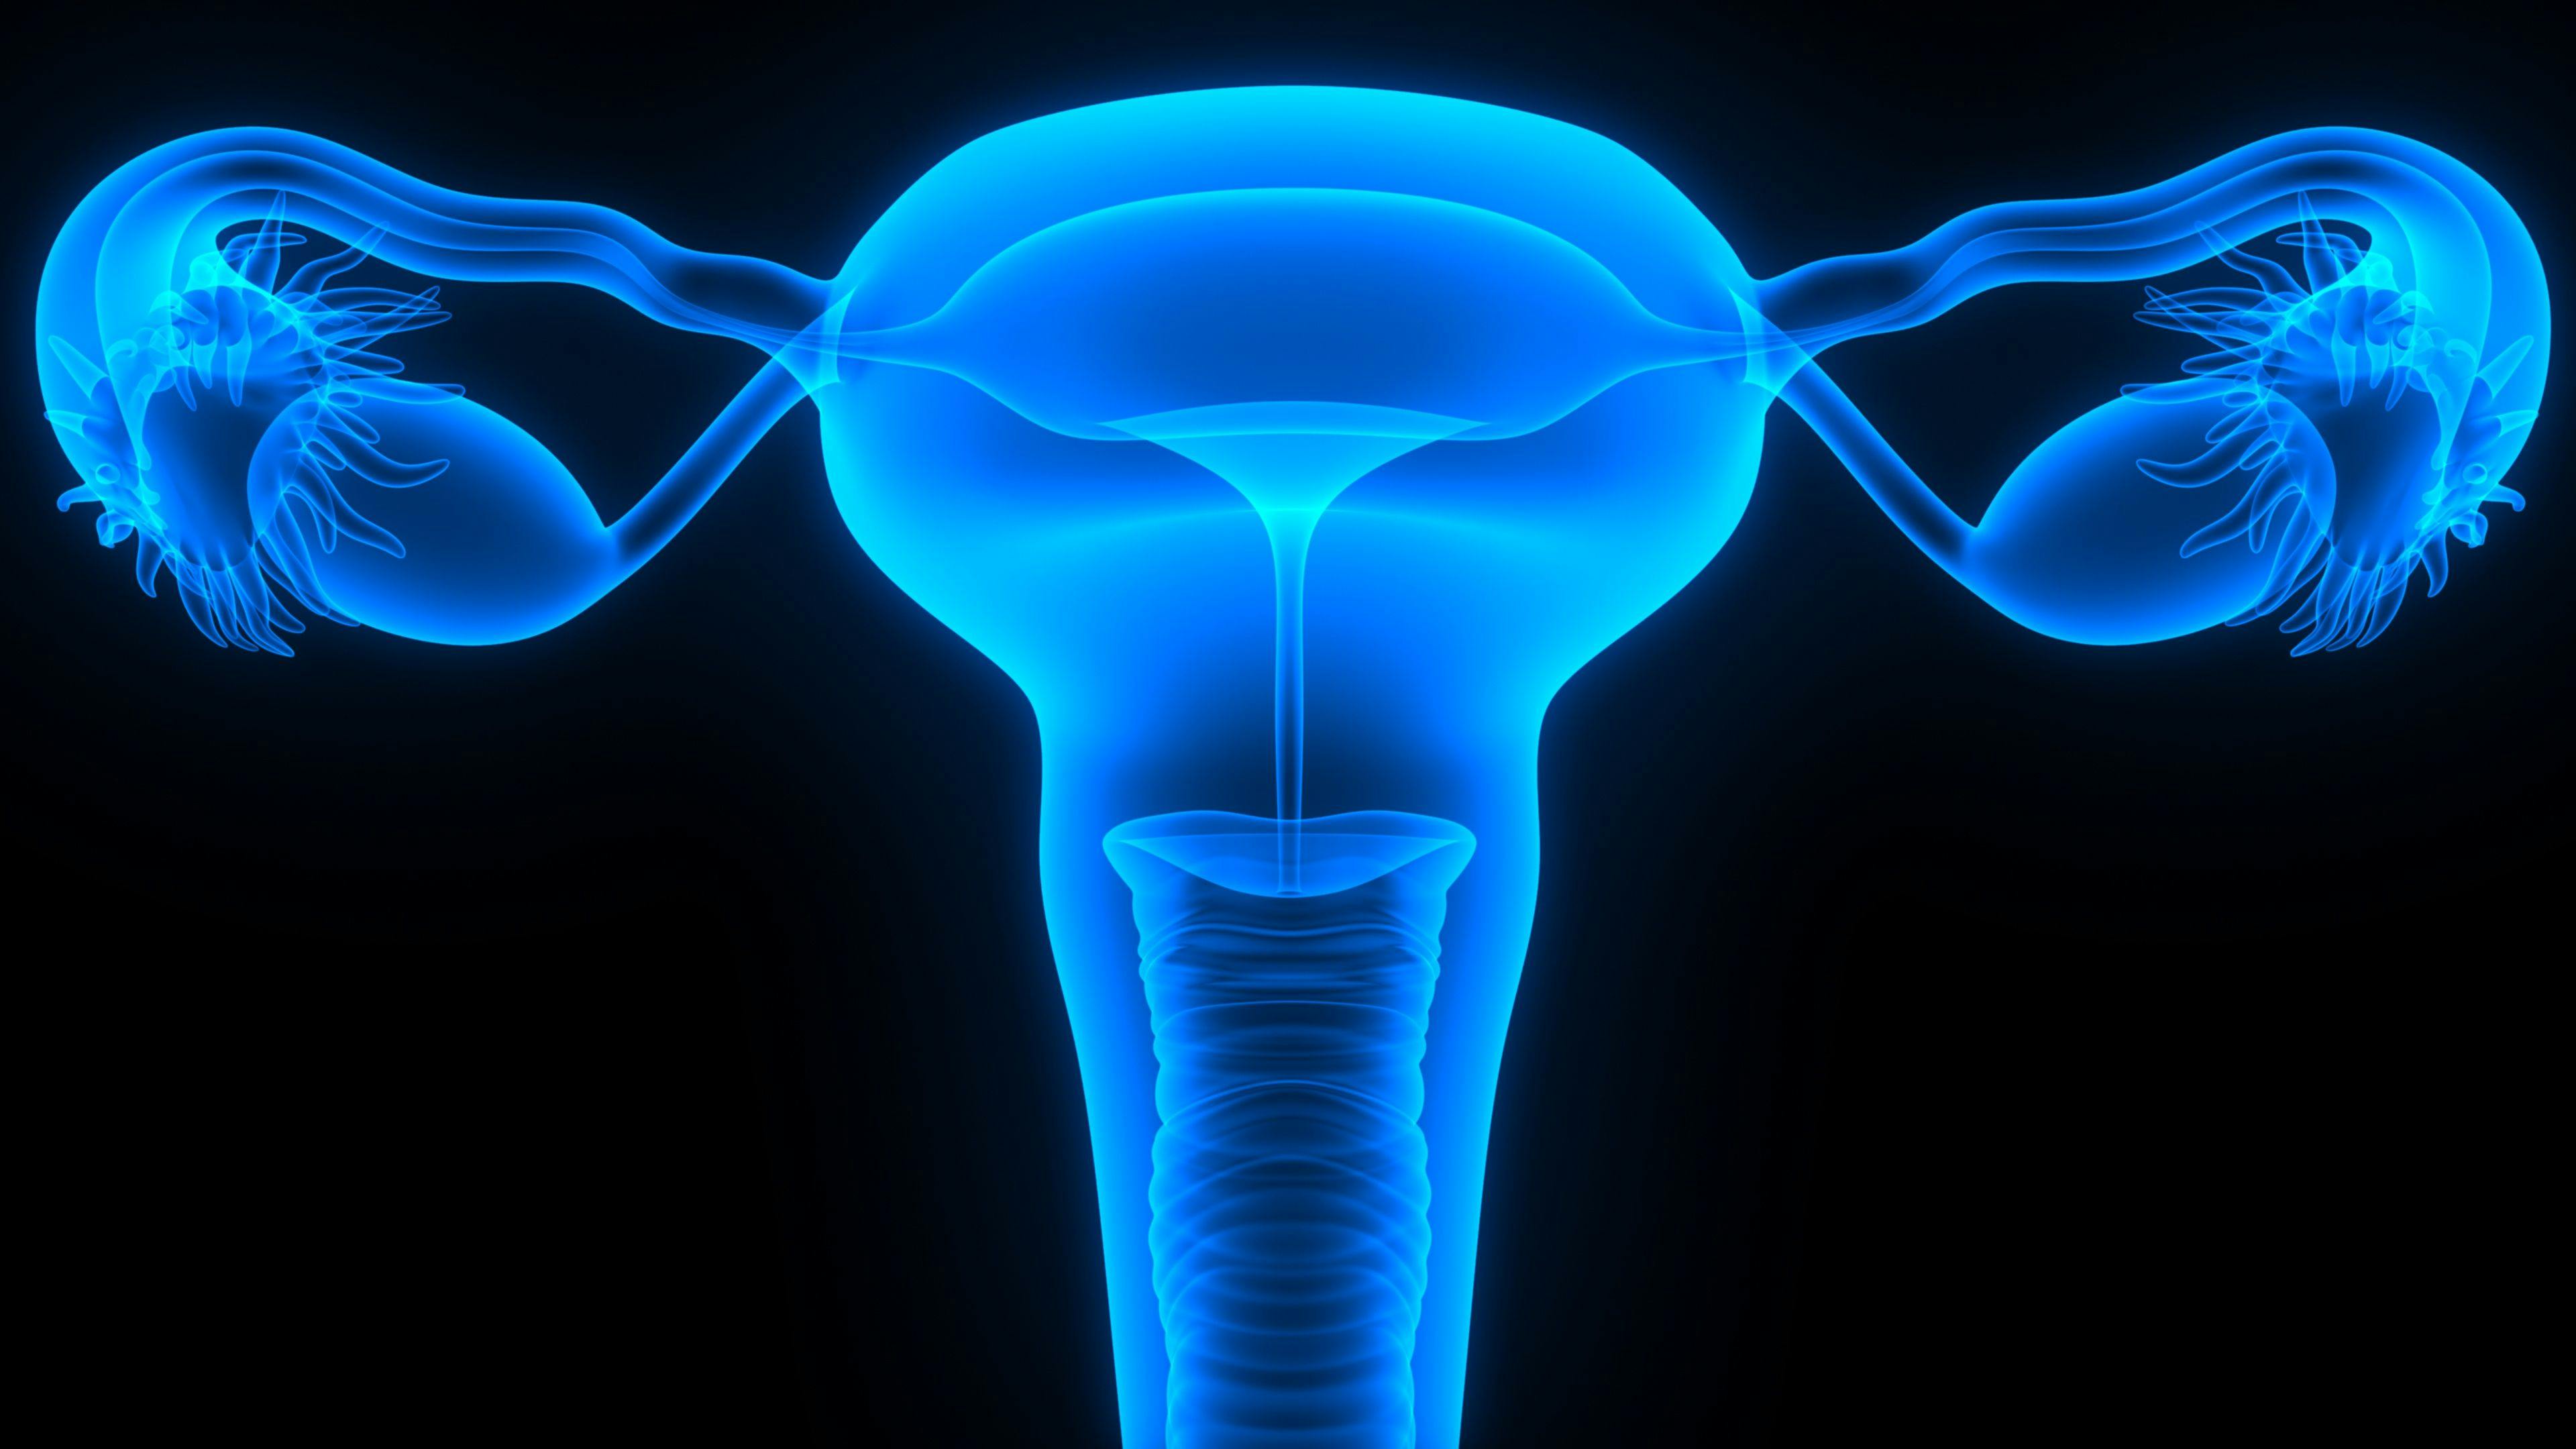 Trabectedin May Not Improve OS Over Chemo in BRCA-Mutated Recurrent Ovarian Cancer